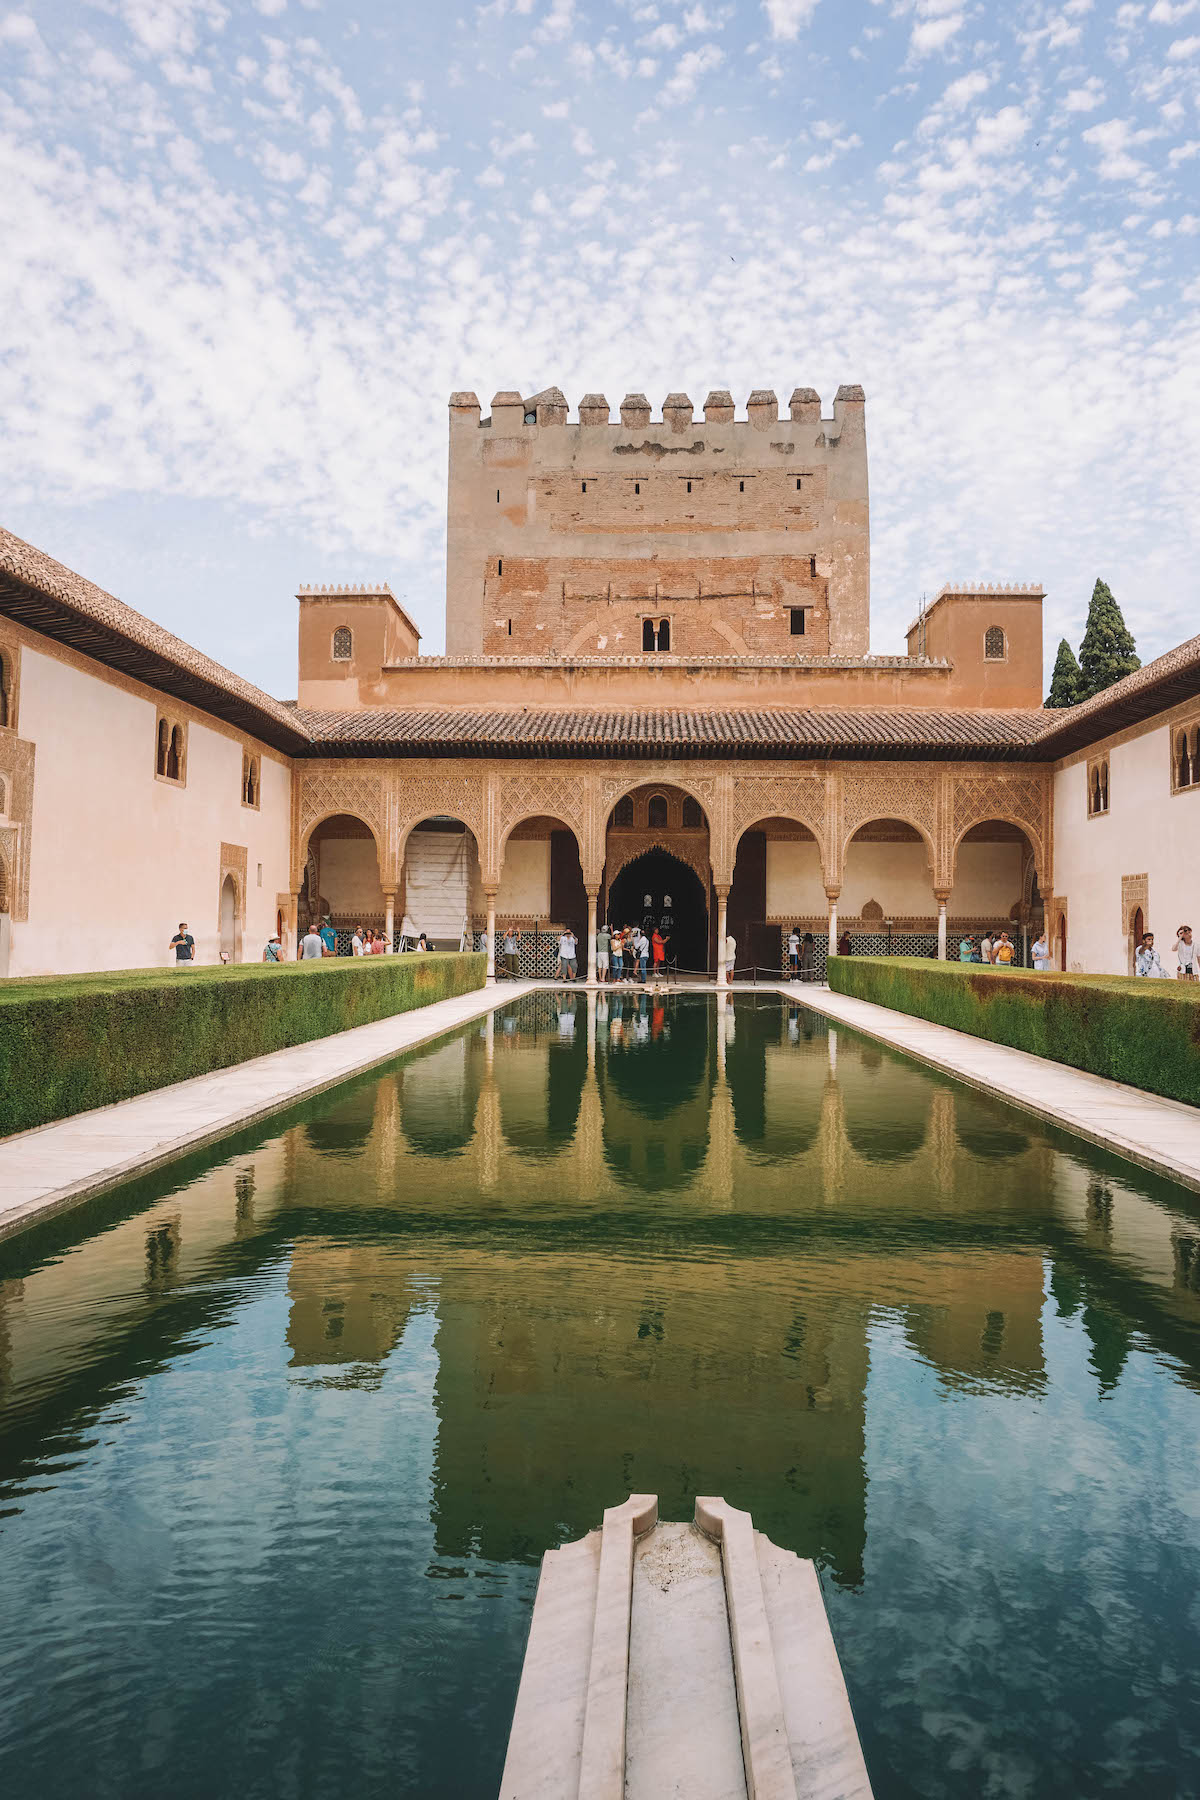 One of the royal palaces within the Alhambra in Granada, Spain.